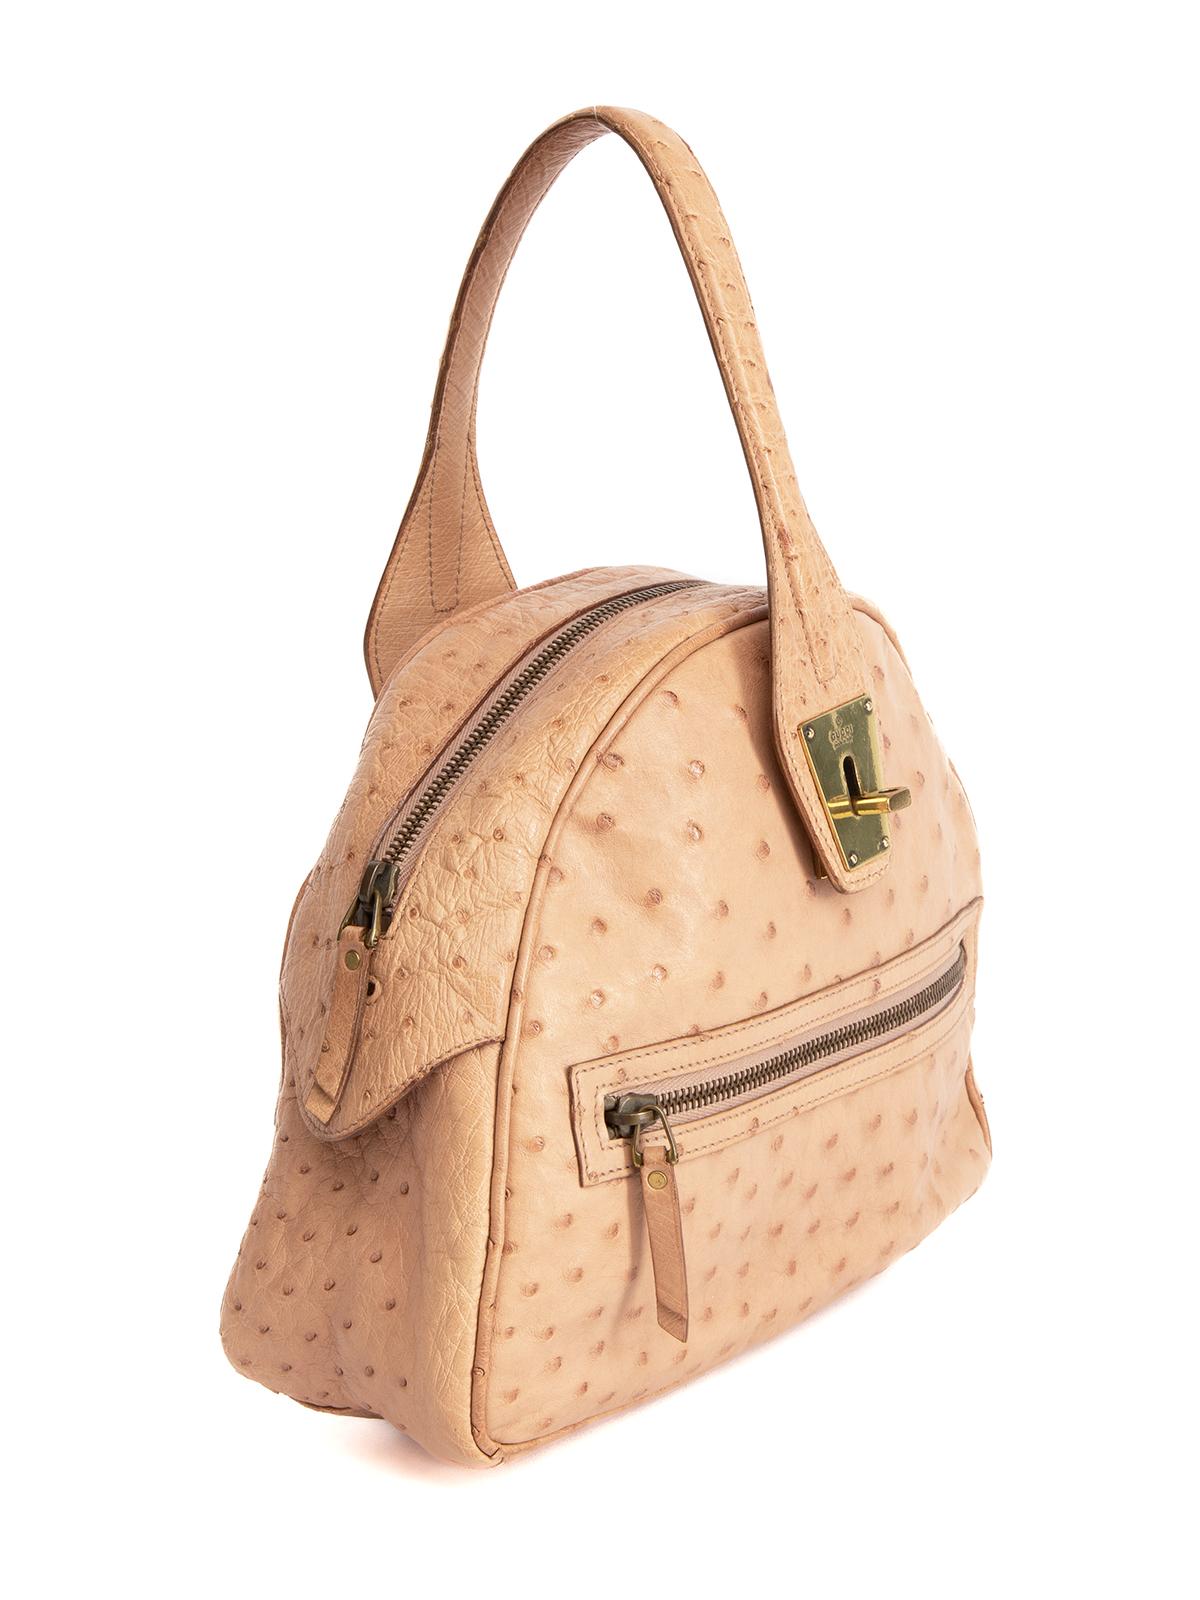 CONDITION is Very good. Minimal wear to bag is evident. Minimal wear to Leather exterior and gold hardware on this used Gucci designer resale item. 



Details


Brown, beige

Leather 

Top handle bag 

Single handle

Gold tone hardware 

Turn lock